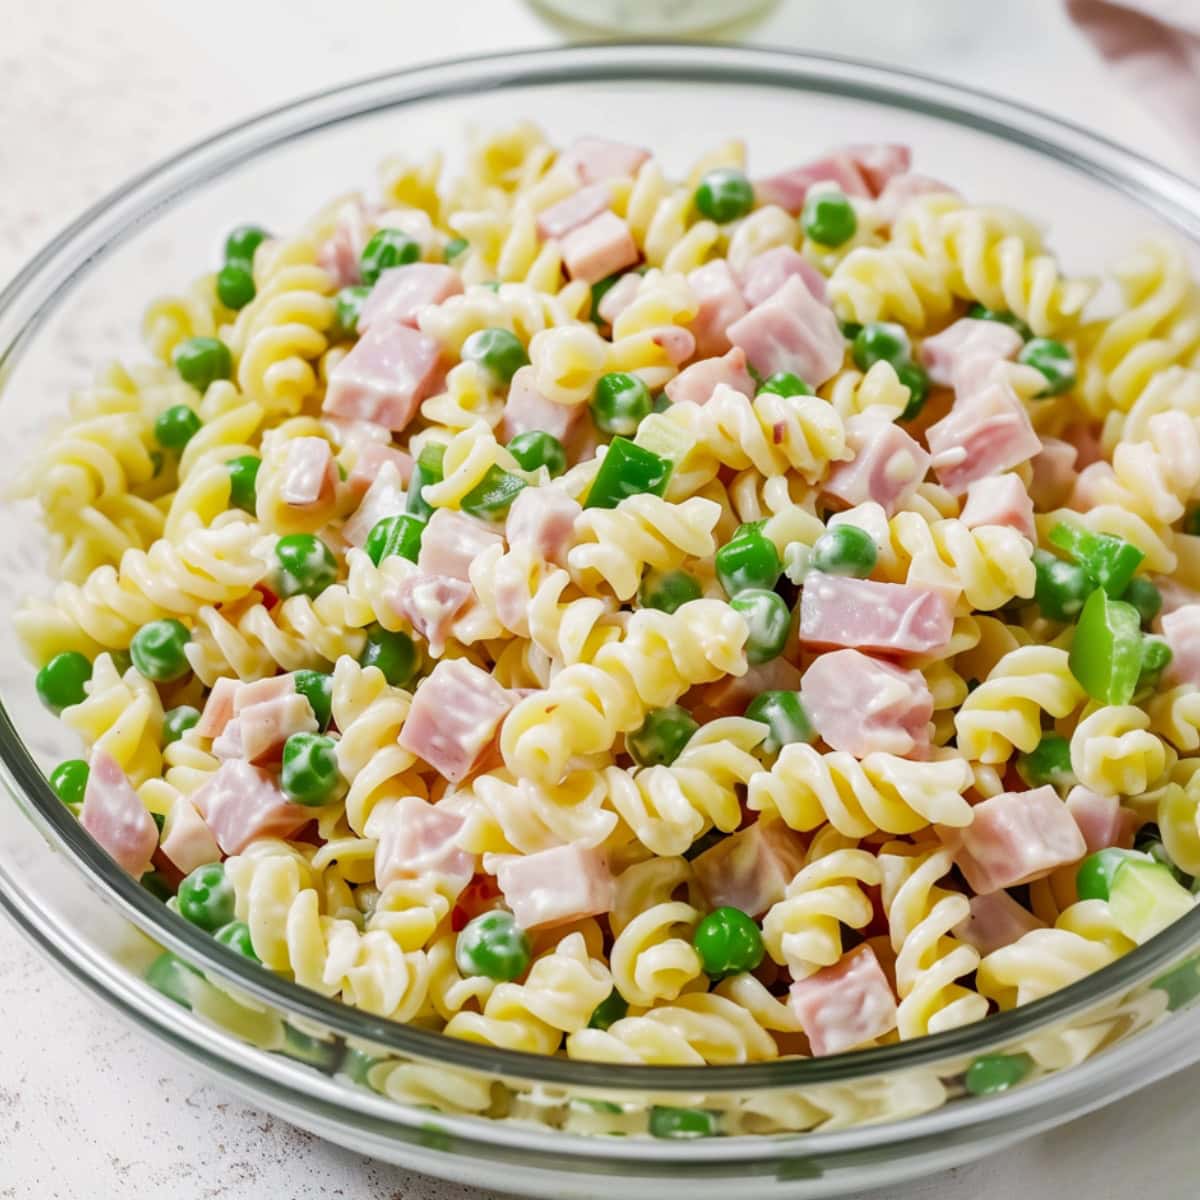 Bowl of rotini pasta, diced ham, frozen peas, and diced green pepper covered in dressing.